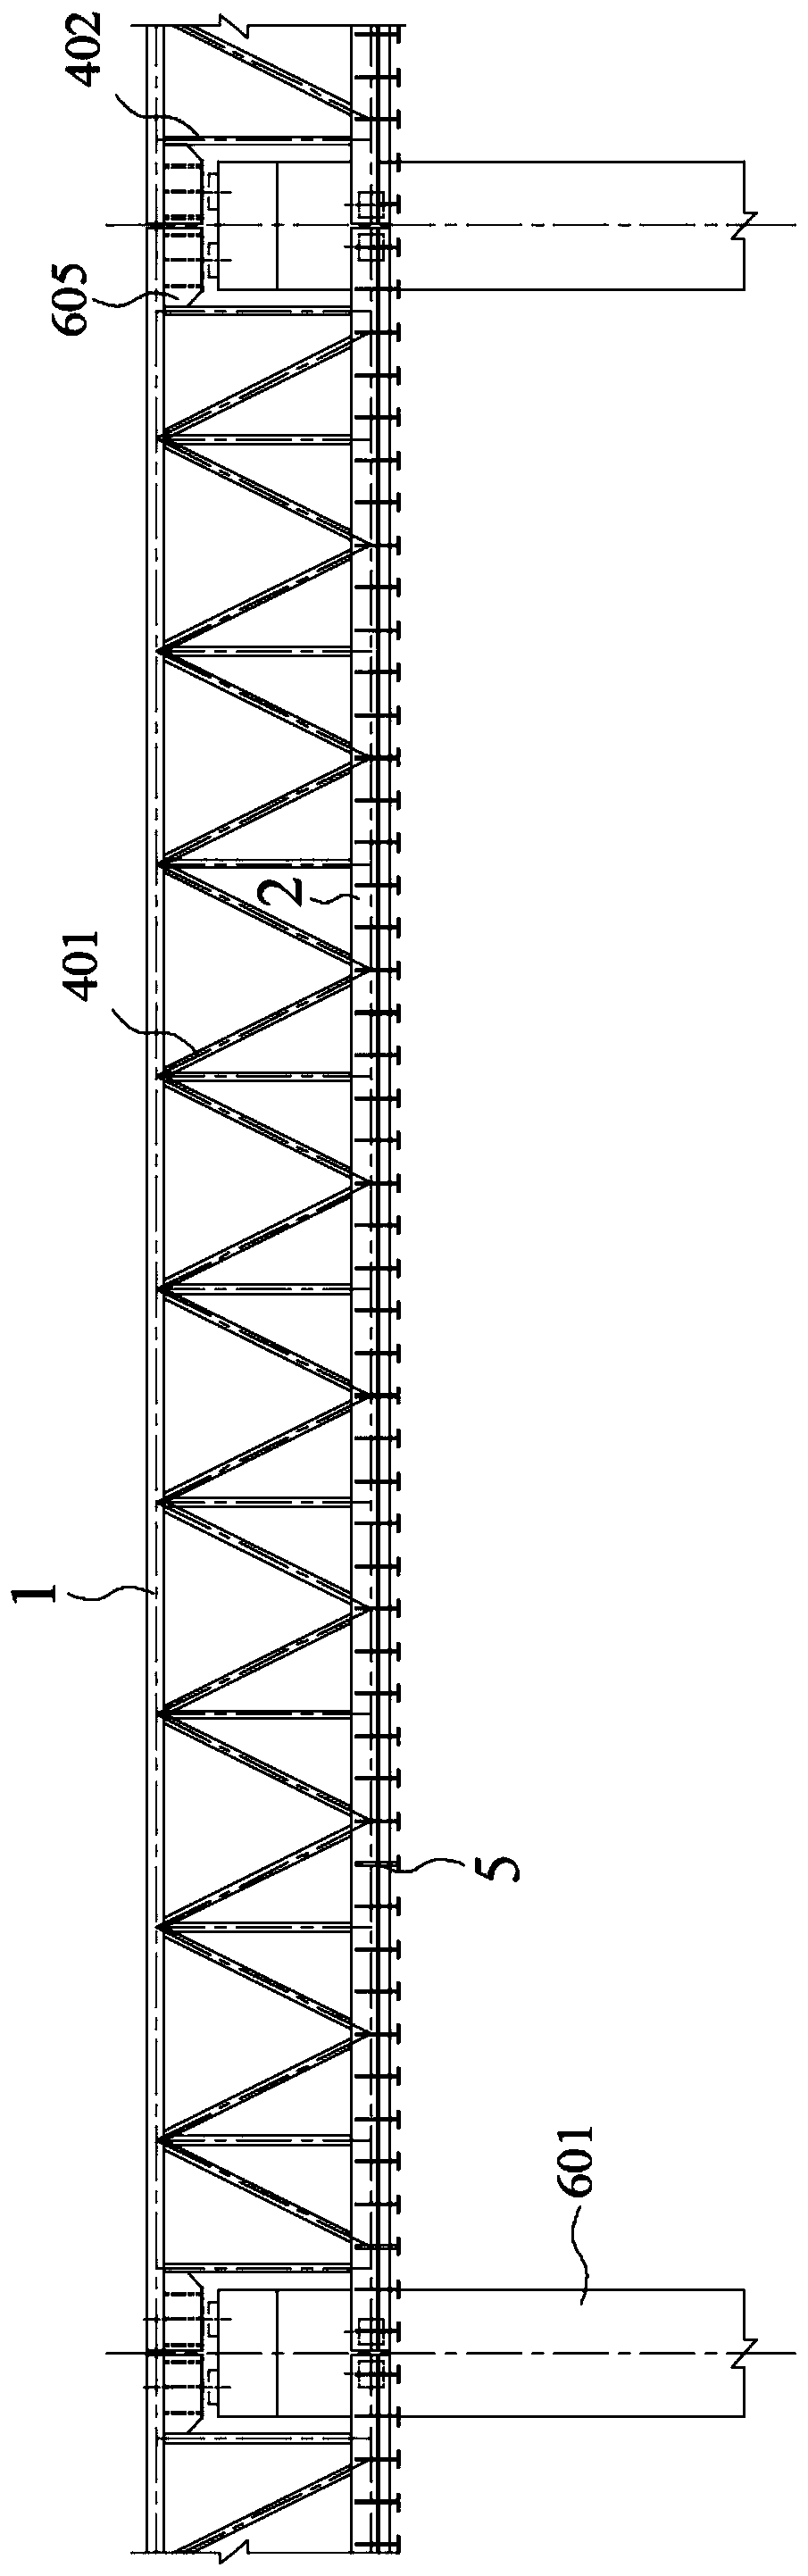 Steel truss girder supporting system suitable for asymmetric suspended monorail